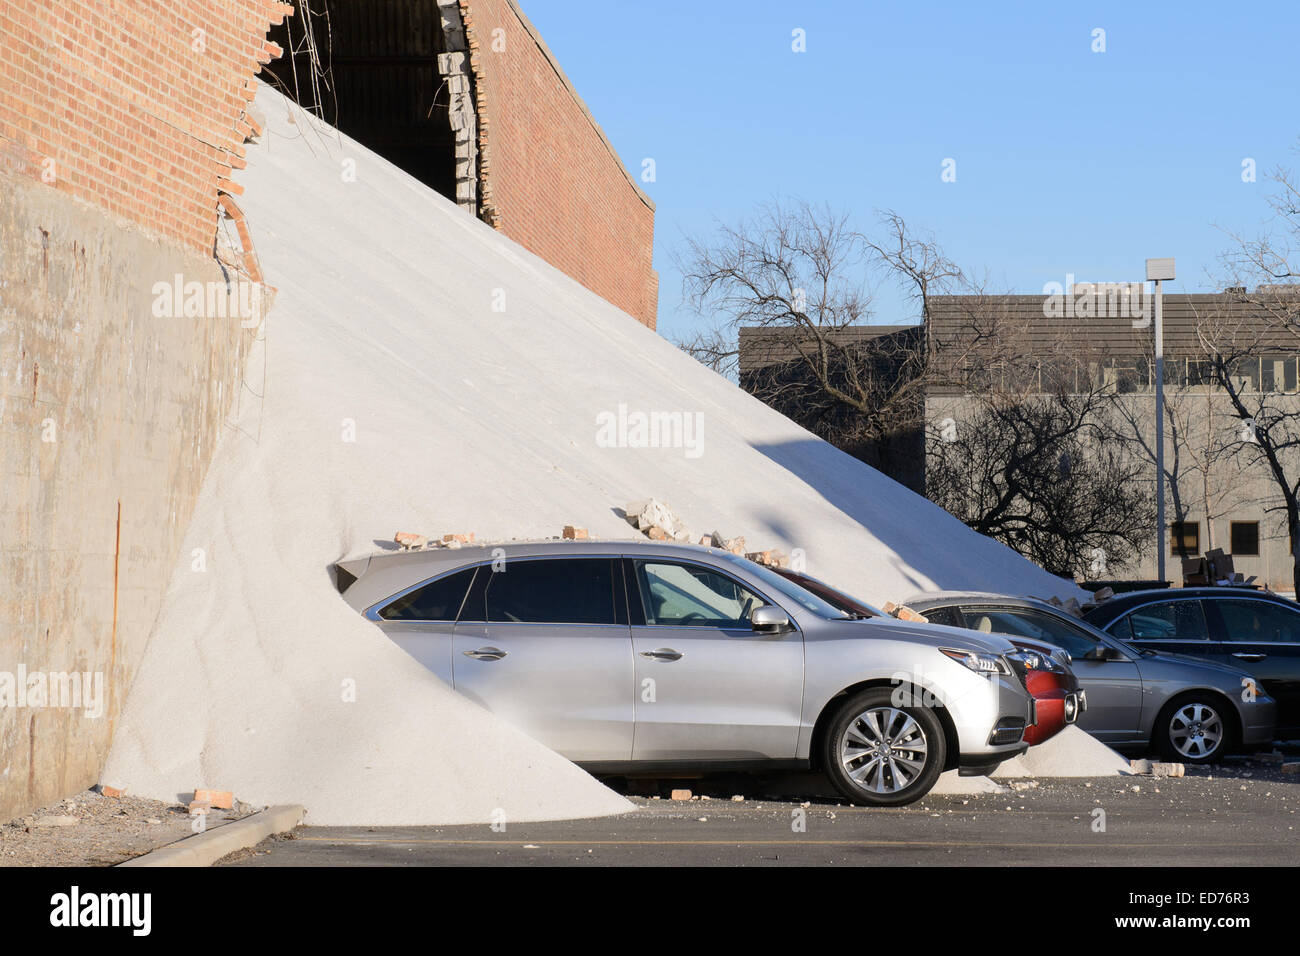 Chicago, Illinois, USA. 30th December, 2014. A wall of a Morton Salt building collapses and spills salt out onto vehicles parked at an Acura dealership in Chicago, IL, on Tuesday December 30, 2014. Credit:  Daniel Boczarski/Alamy Live News Stock Photo